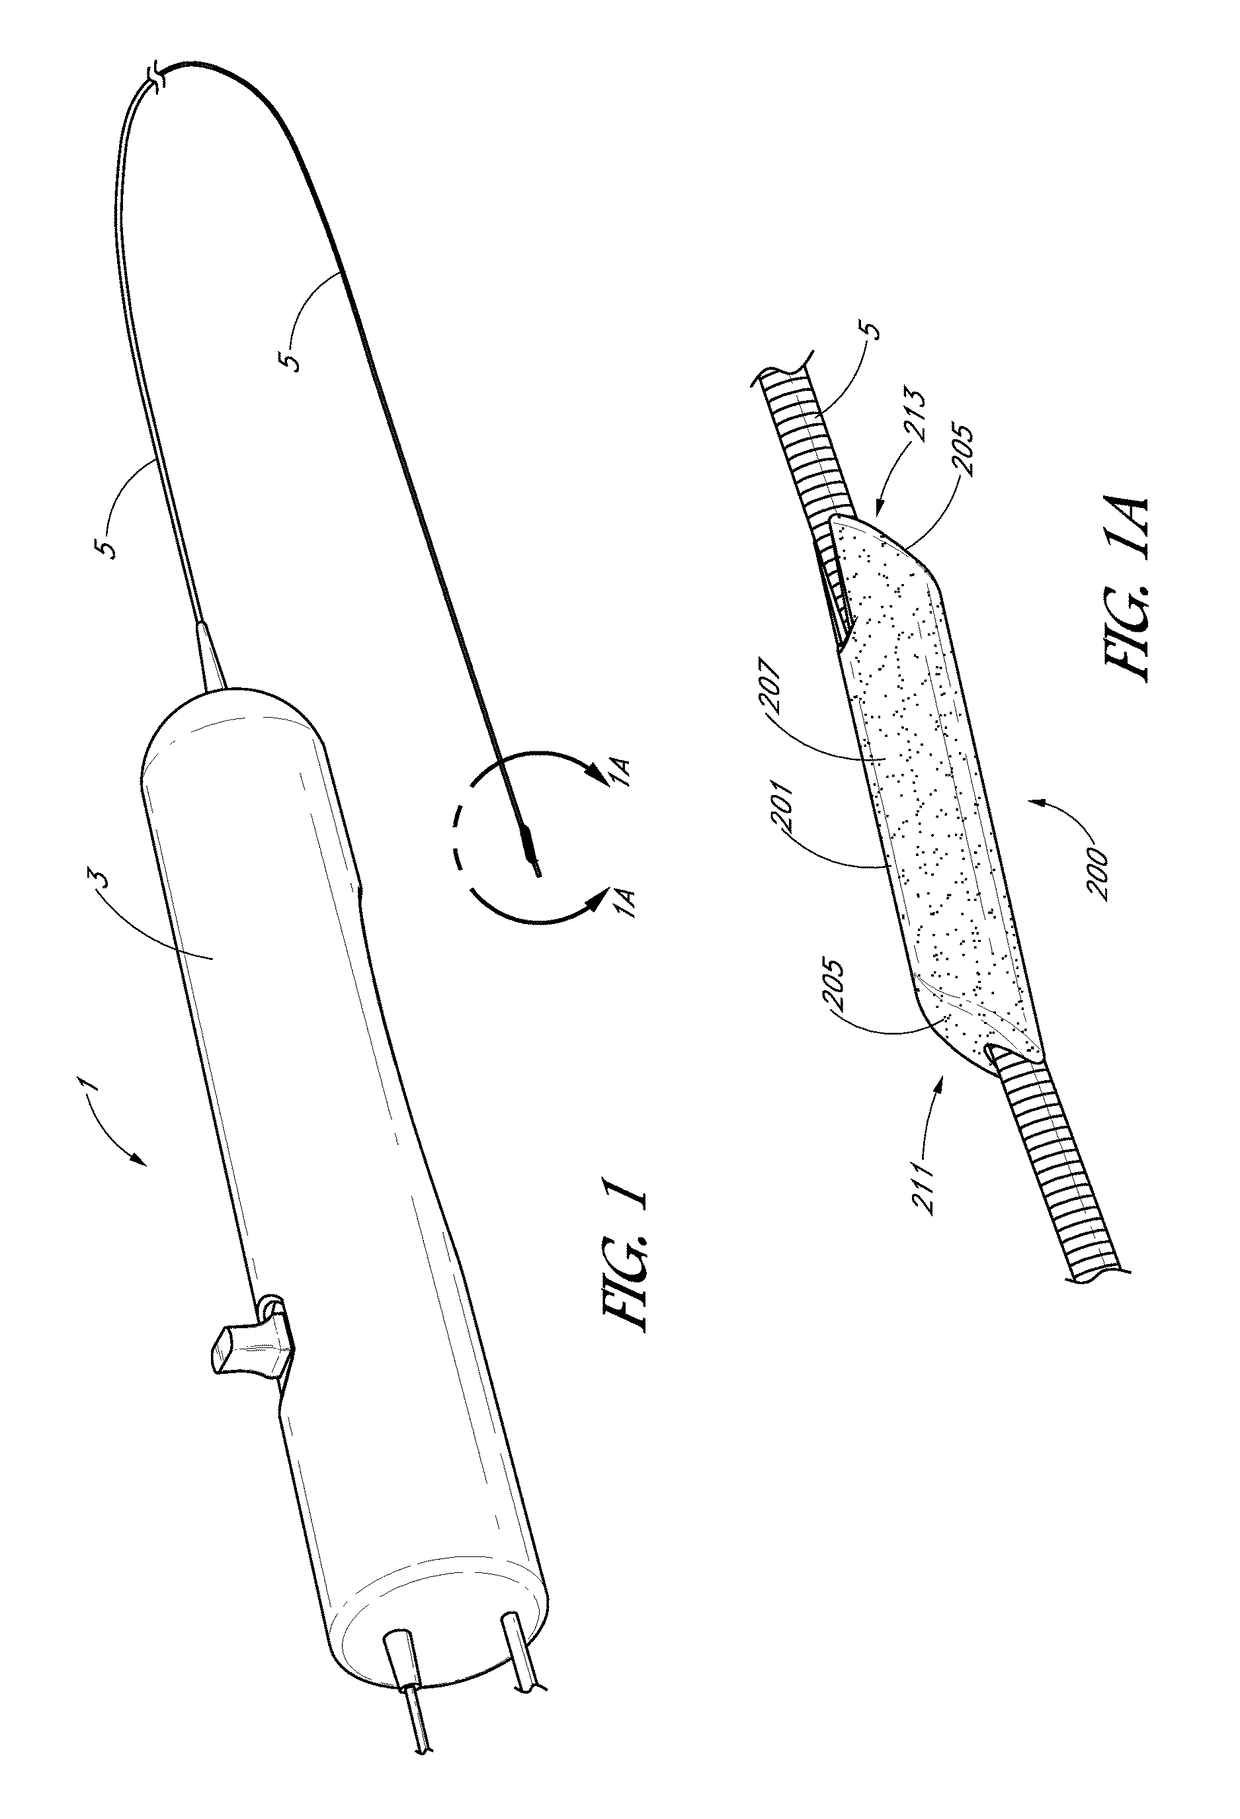 Abrasive elements for rotational atherectomy systems